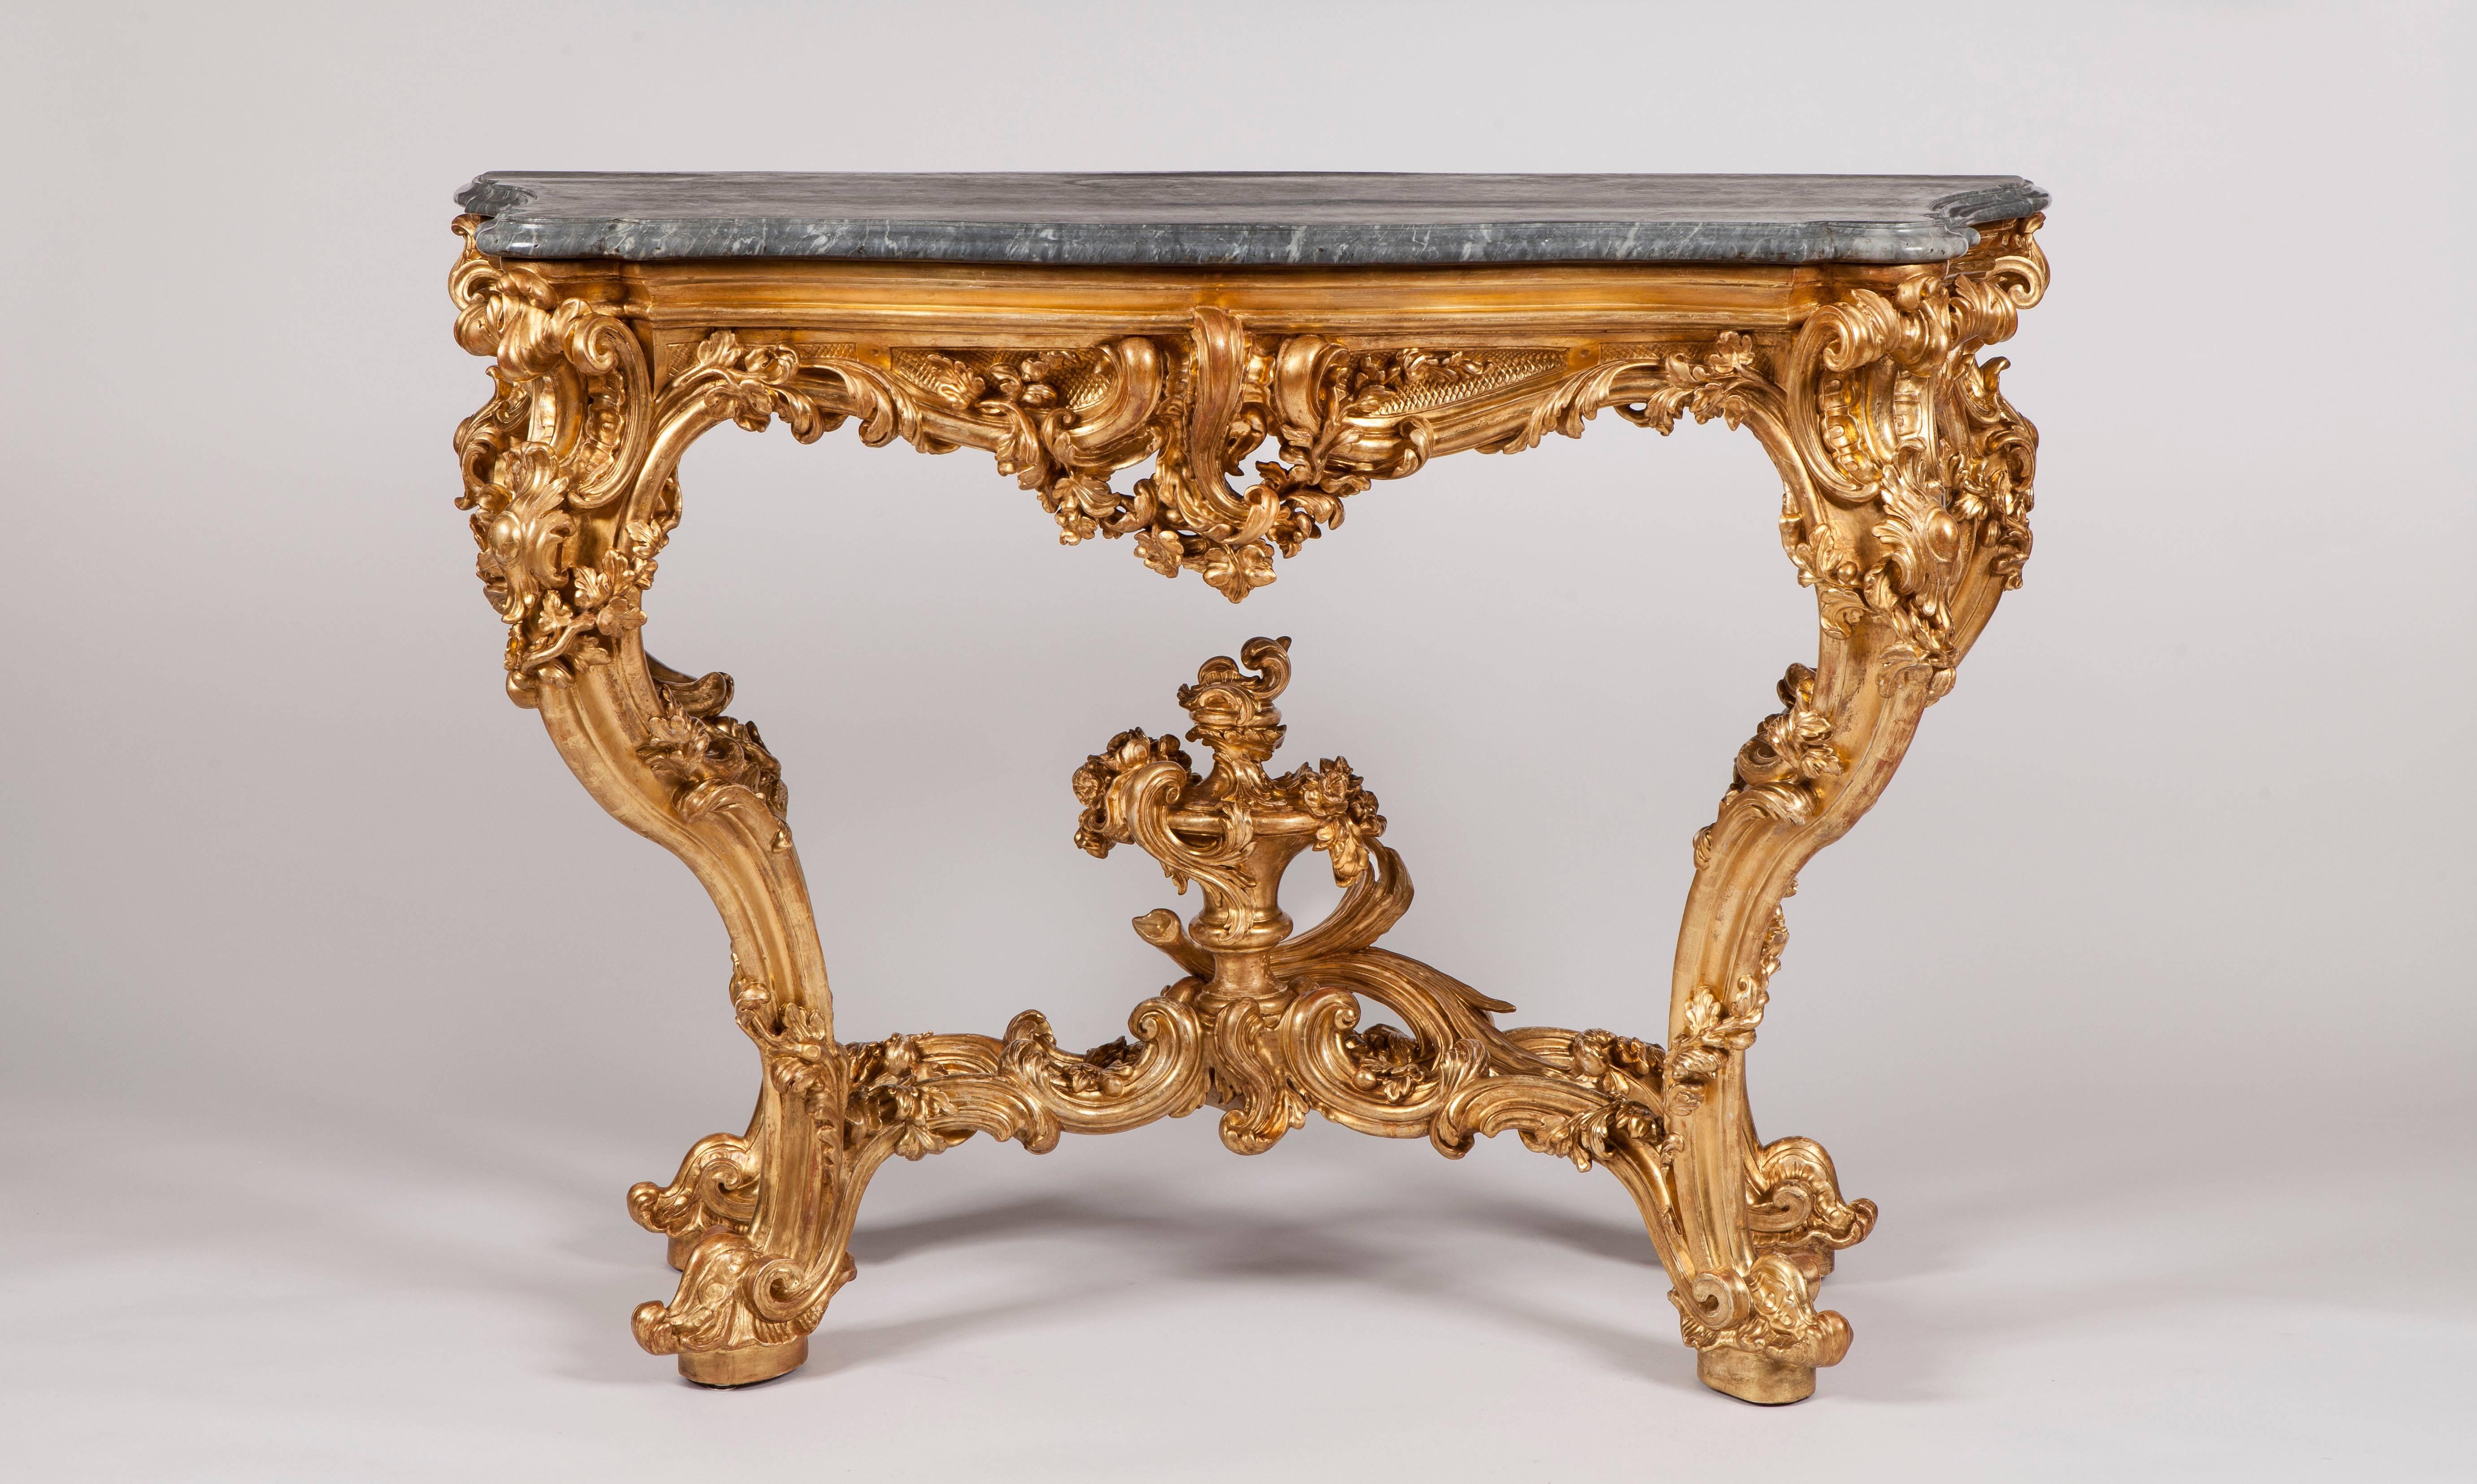 Pair of 18th Century Rococo Northern Italian Giltwood and Marble Console Tables (Rokoko)